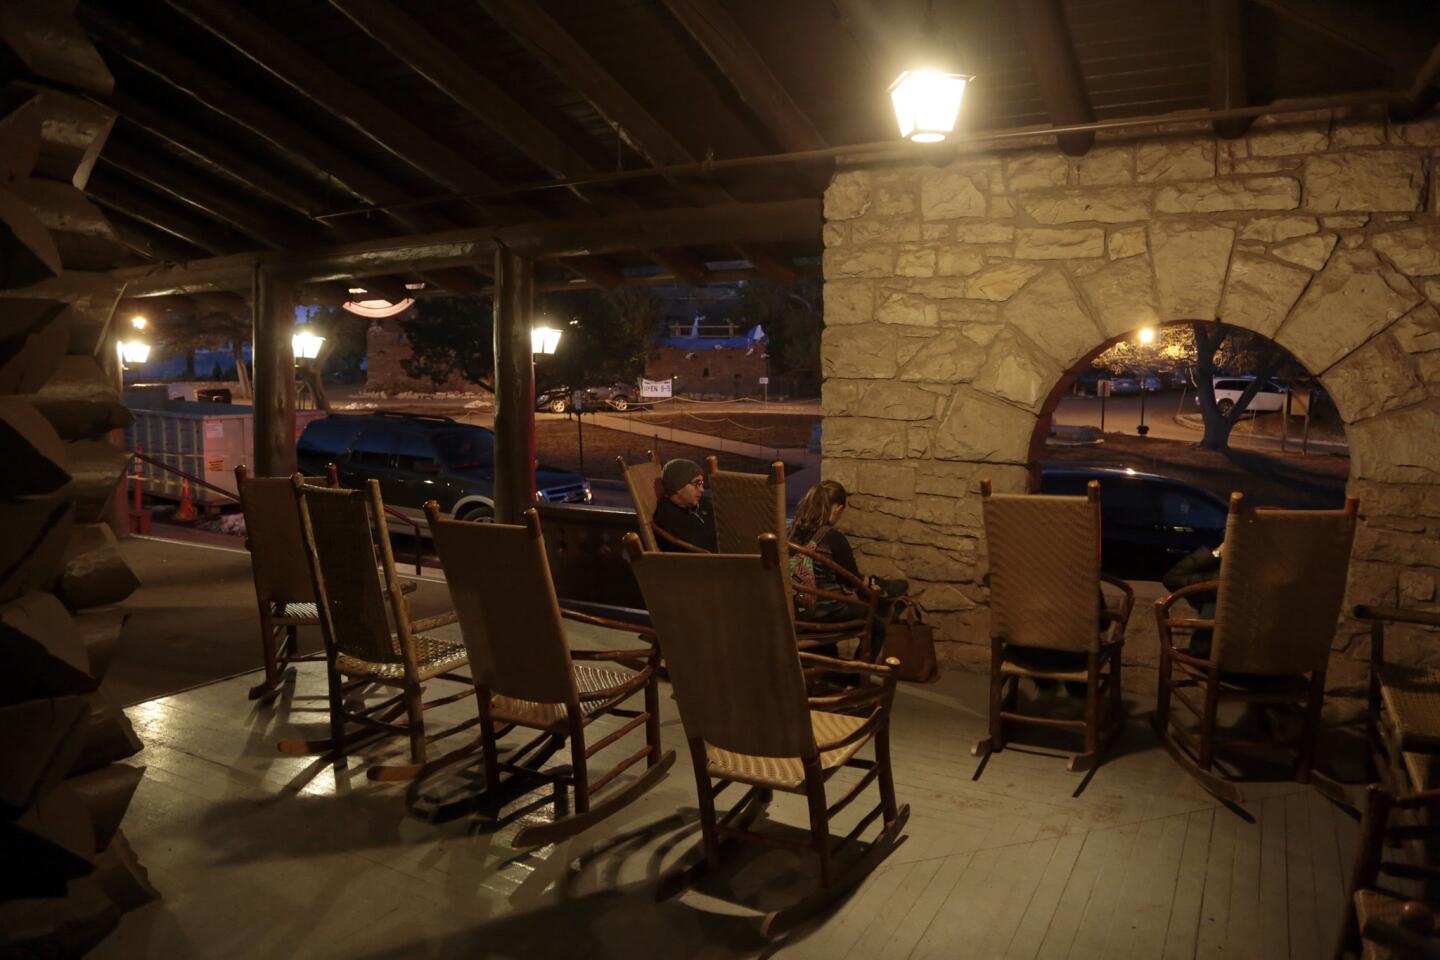 Rocking chairs await visitors to the 110-year-old El Tovar Hotel on the South Rim of the Grand Canyon.